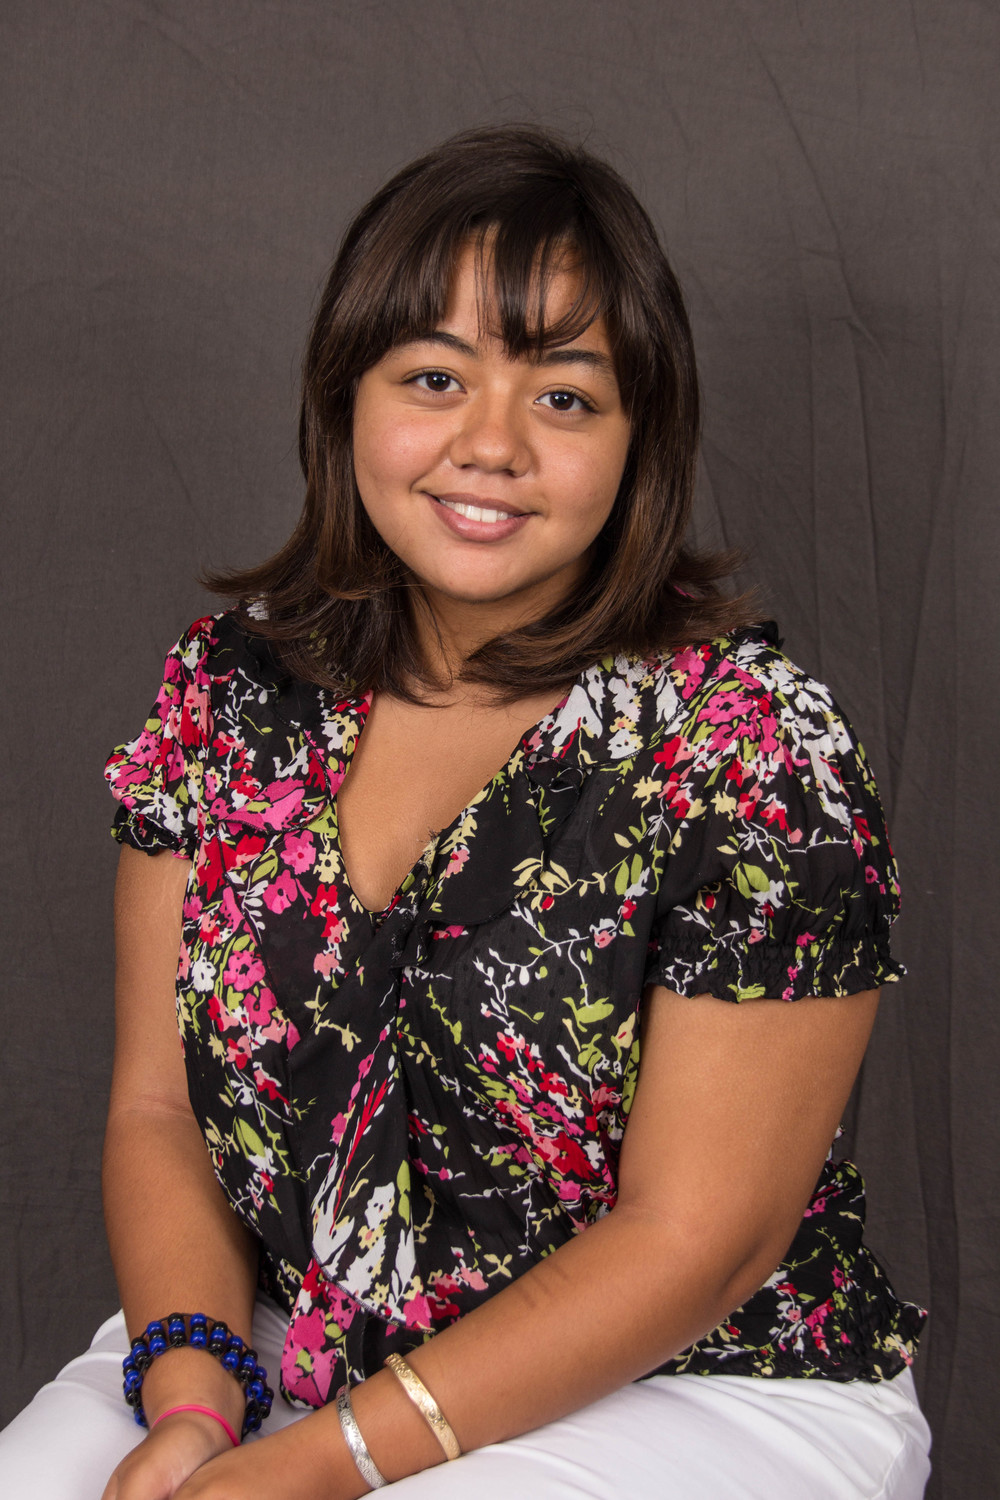 "CTL has showed me how I can change my community it gave me simple steps to aligning my actions with my beliefs. I see myself breaking social barriers." Star Kaohu-Scorce | CTL Class of 2012 | Nanakuli High School